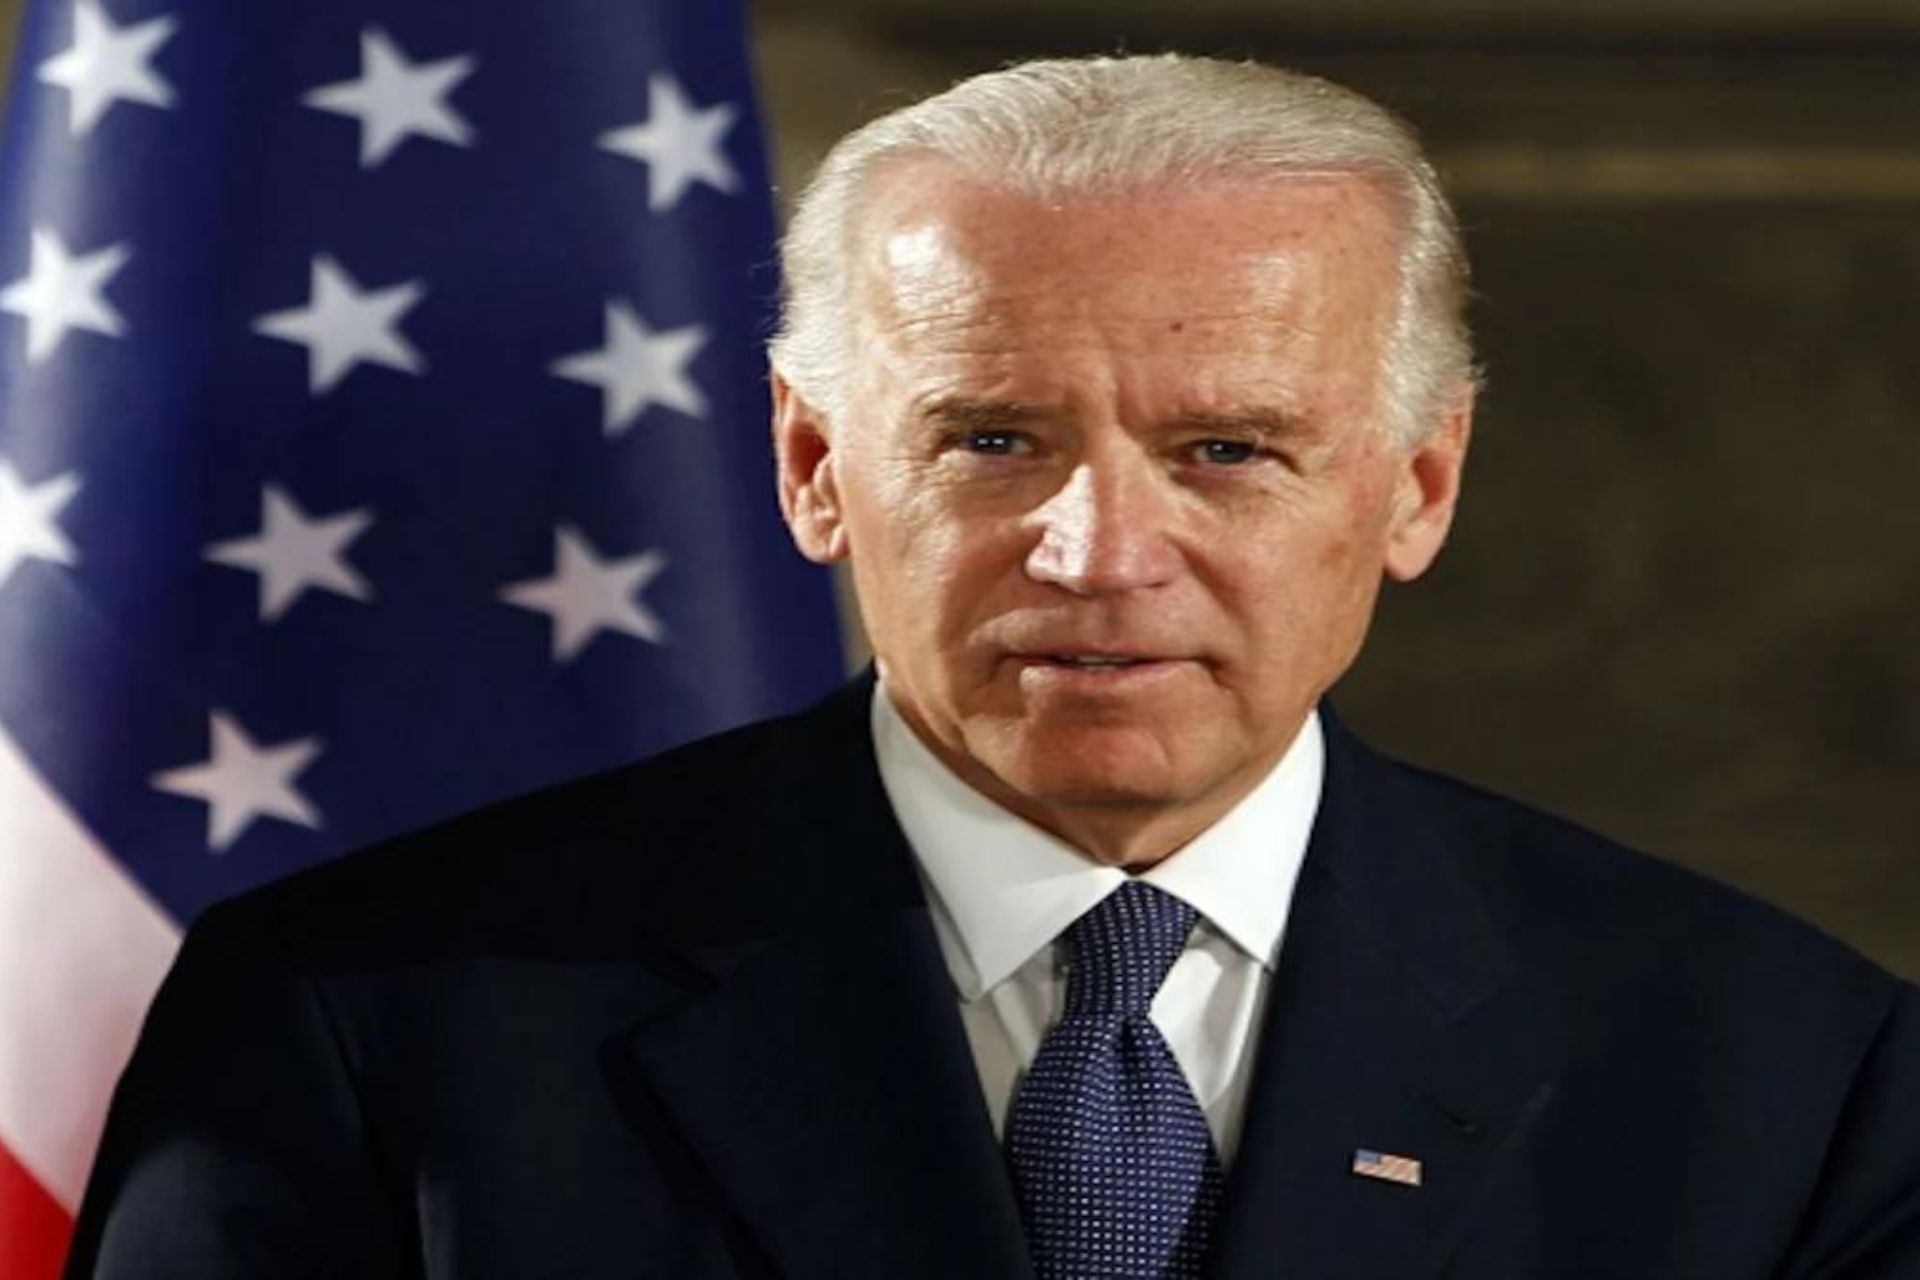 President Biden’s job approval rating hits a new low in a public poll -thegovernment.vision